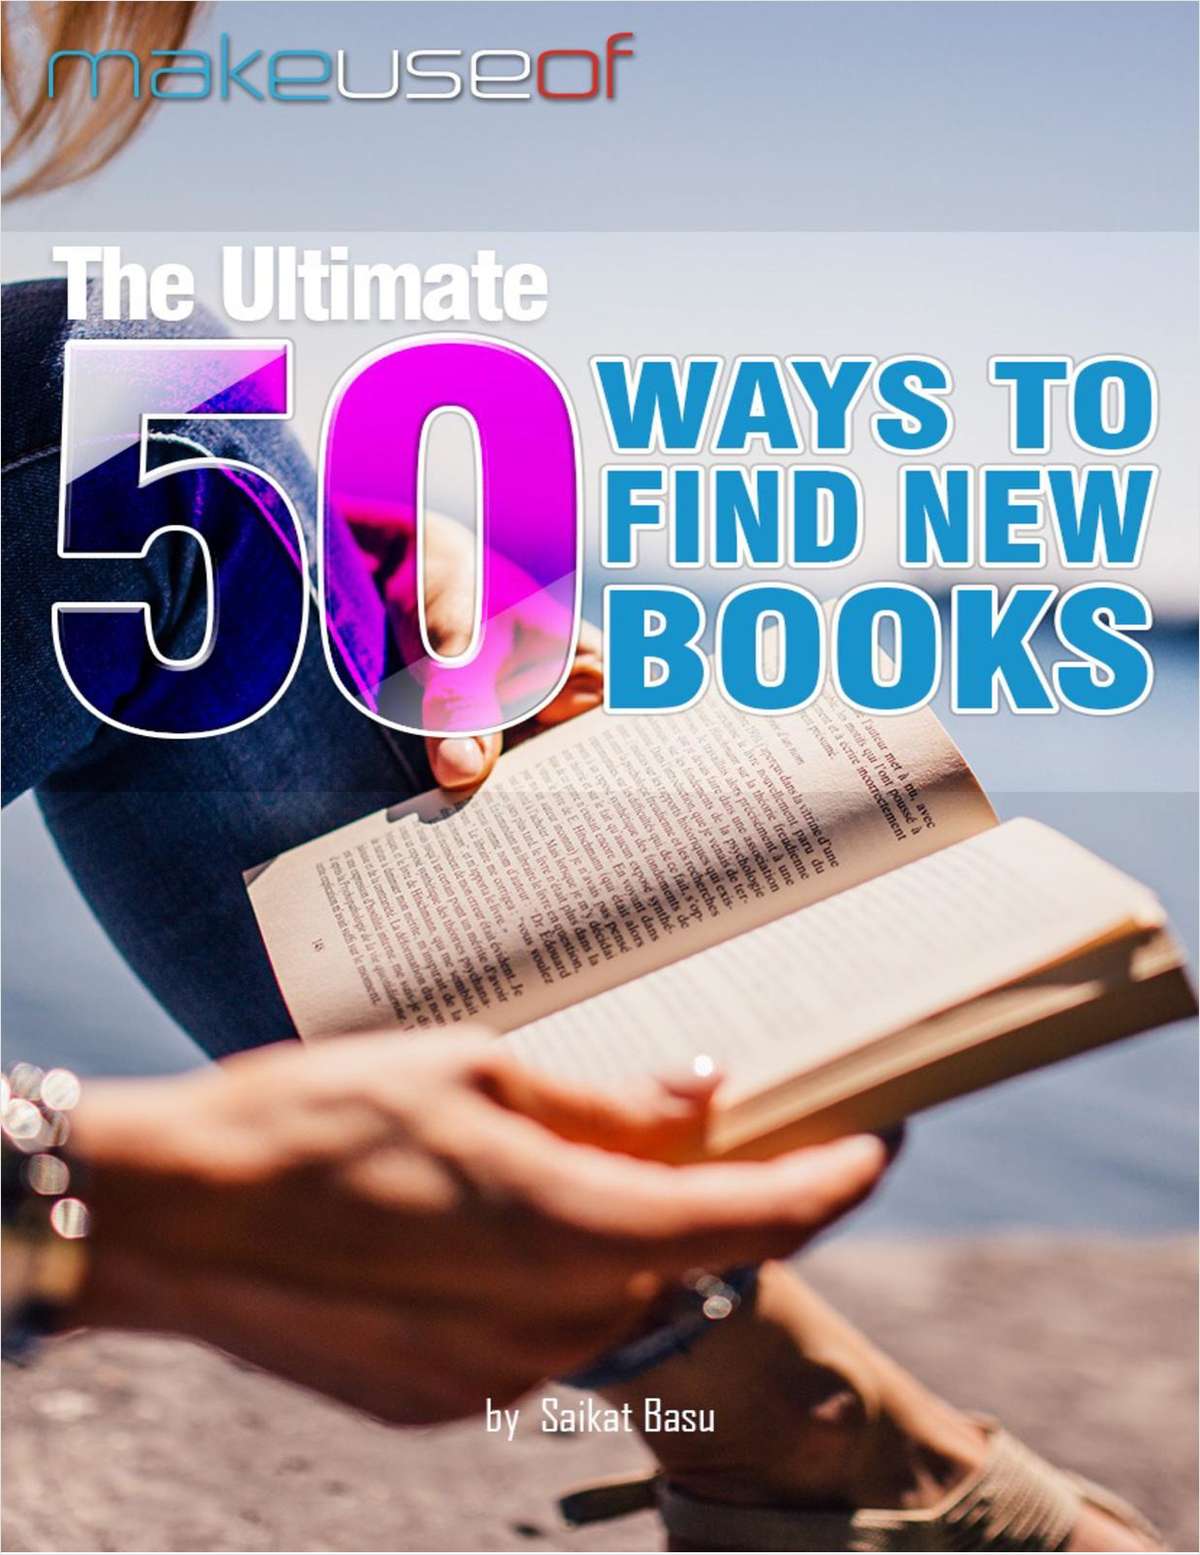 The Ultimate 50 Ways to Find New Books to Read